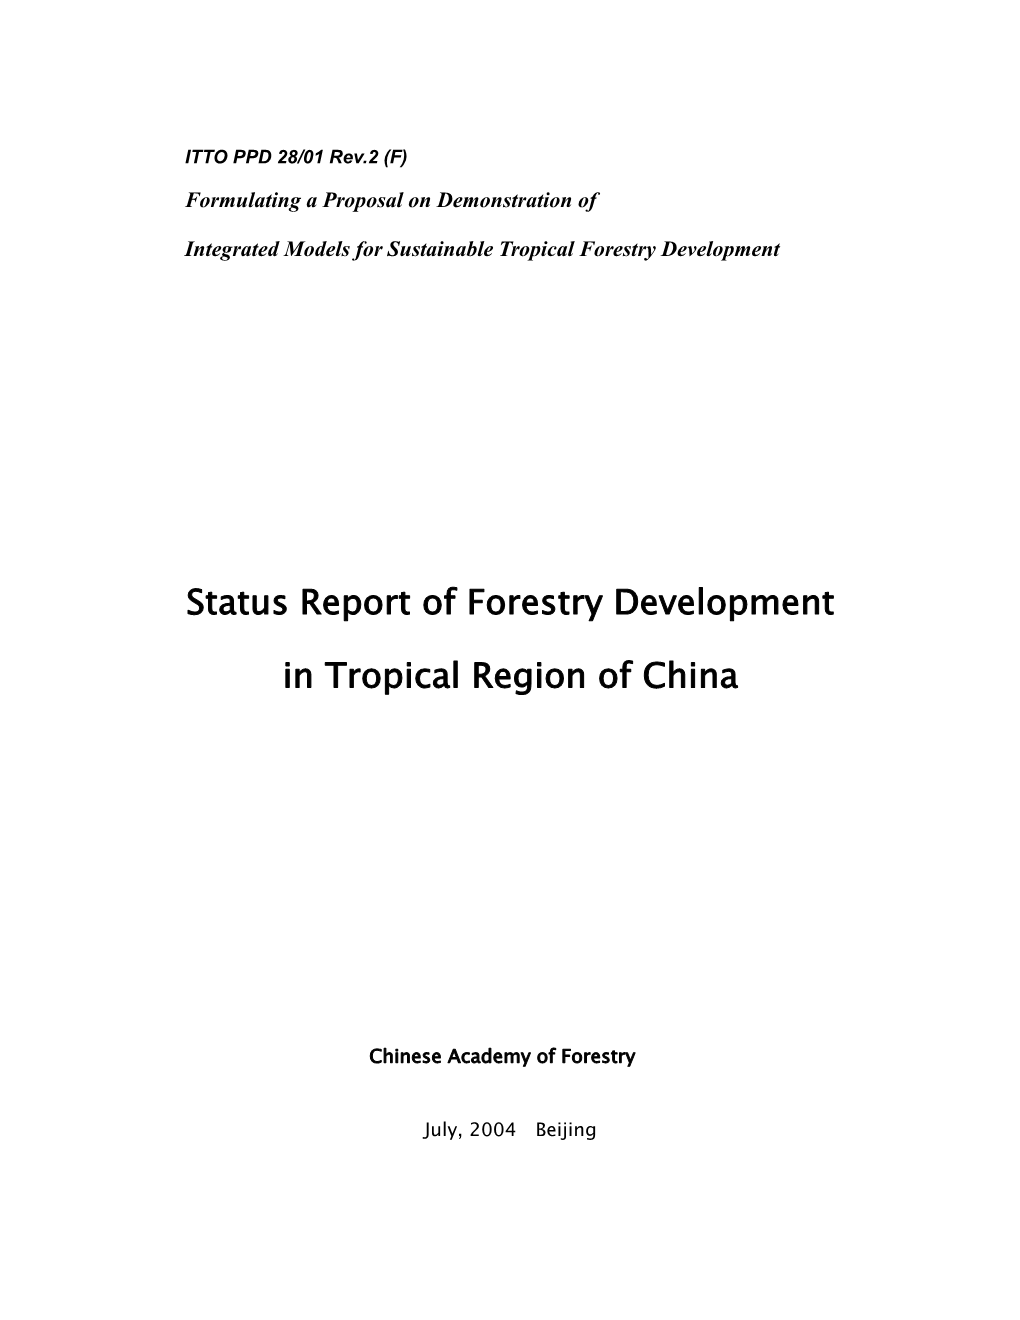 Status Report of Forestry Development in Tropical Region of China